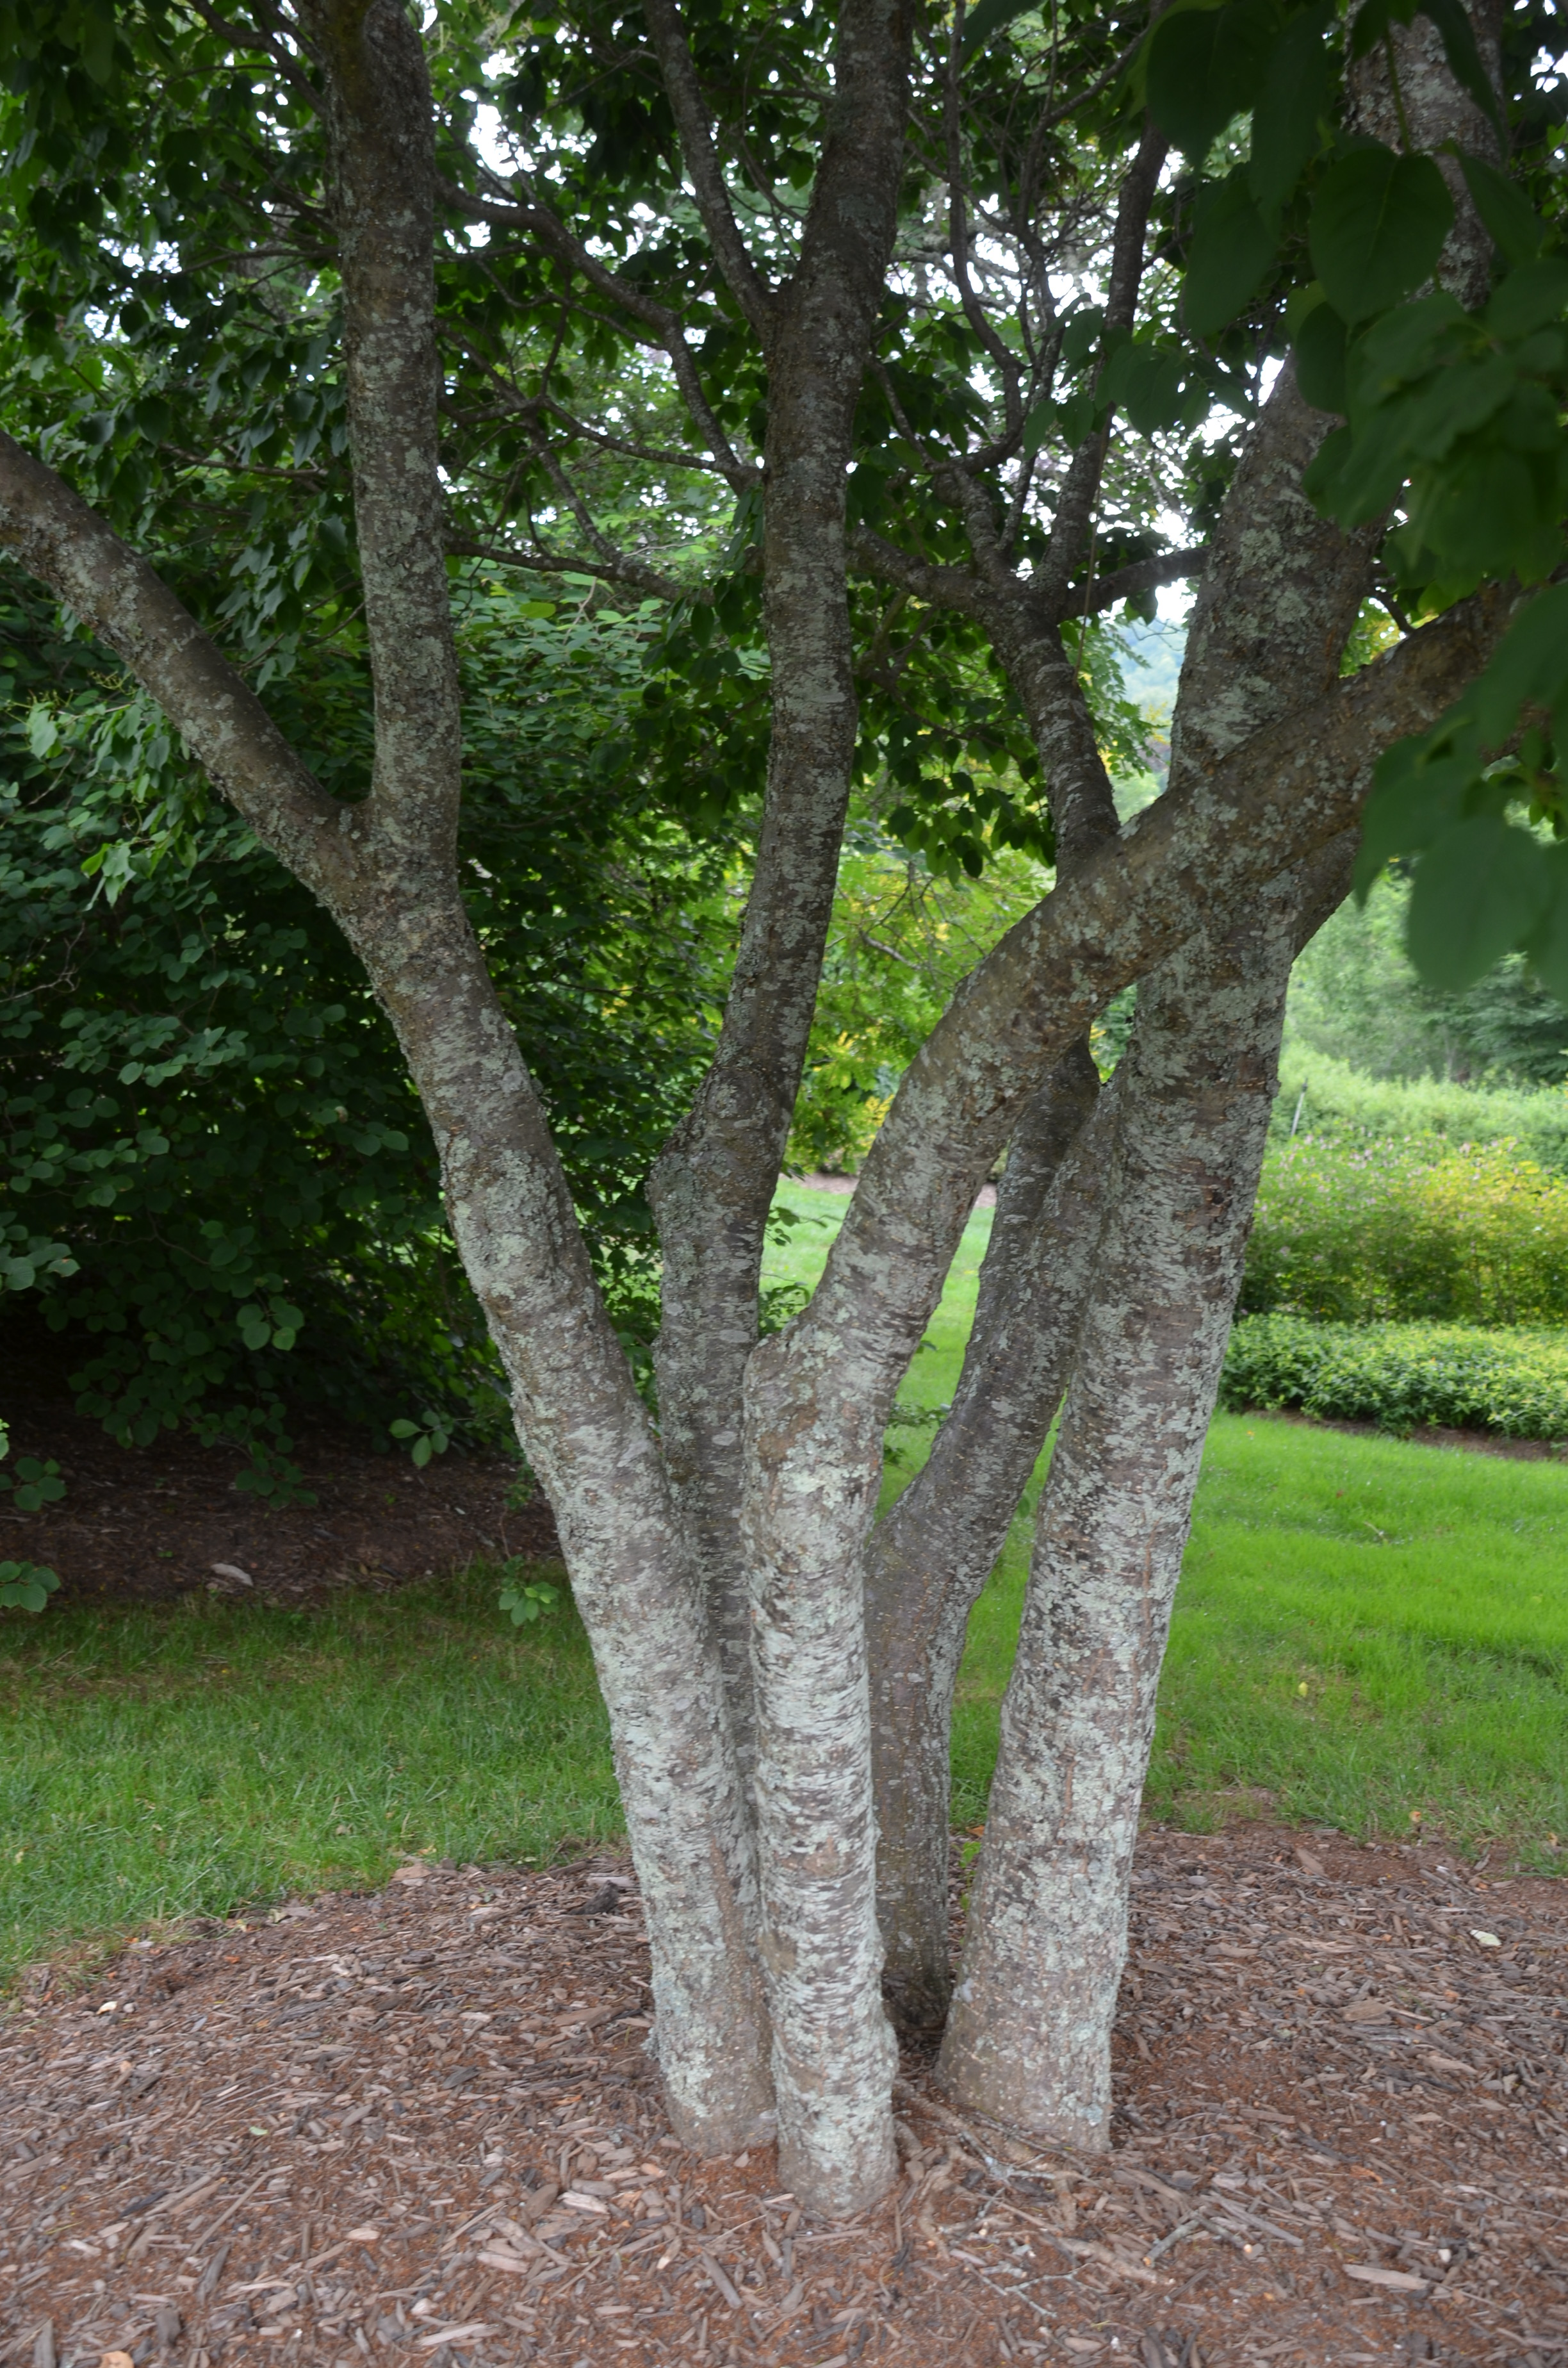 Japanese Tree Lilac Is Excellent Late Flowering Form | What Grows There ...